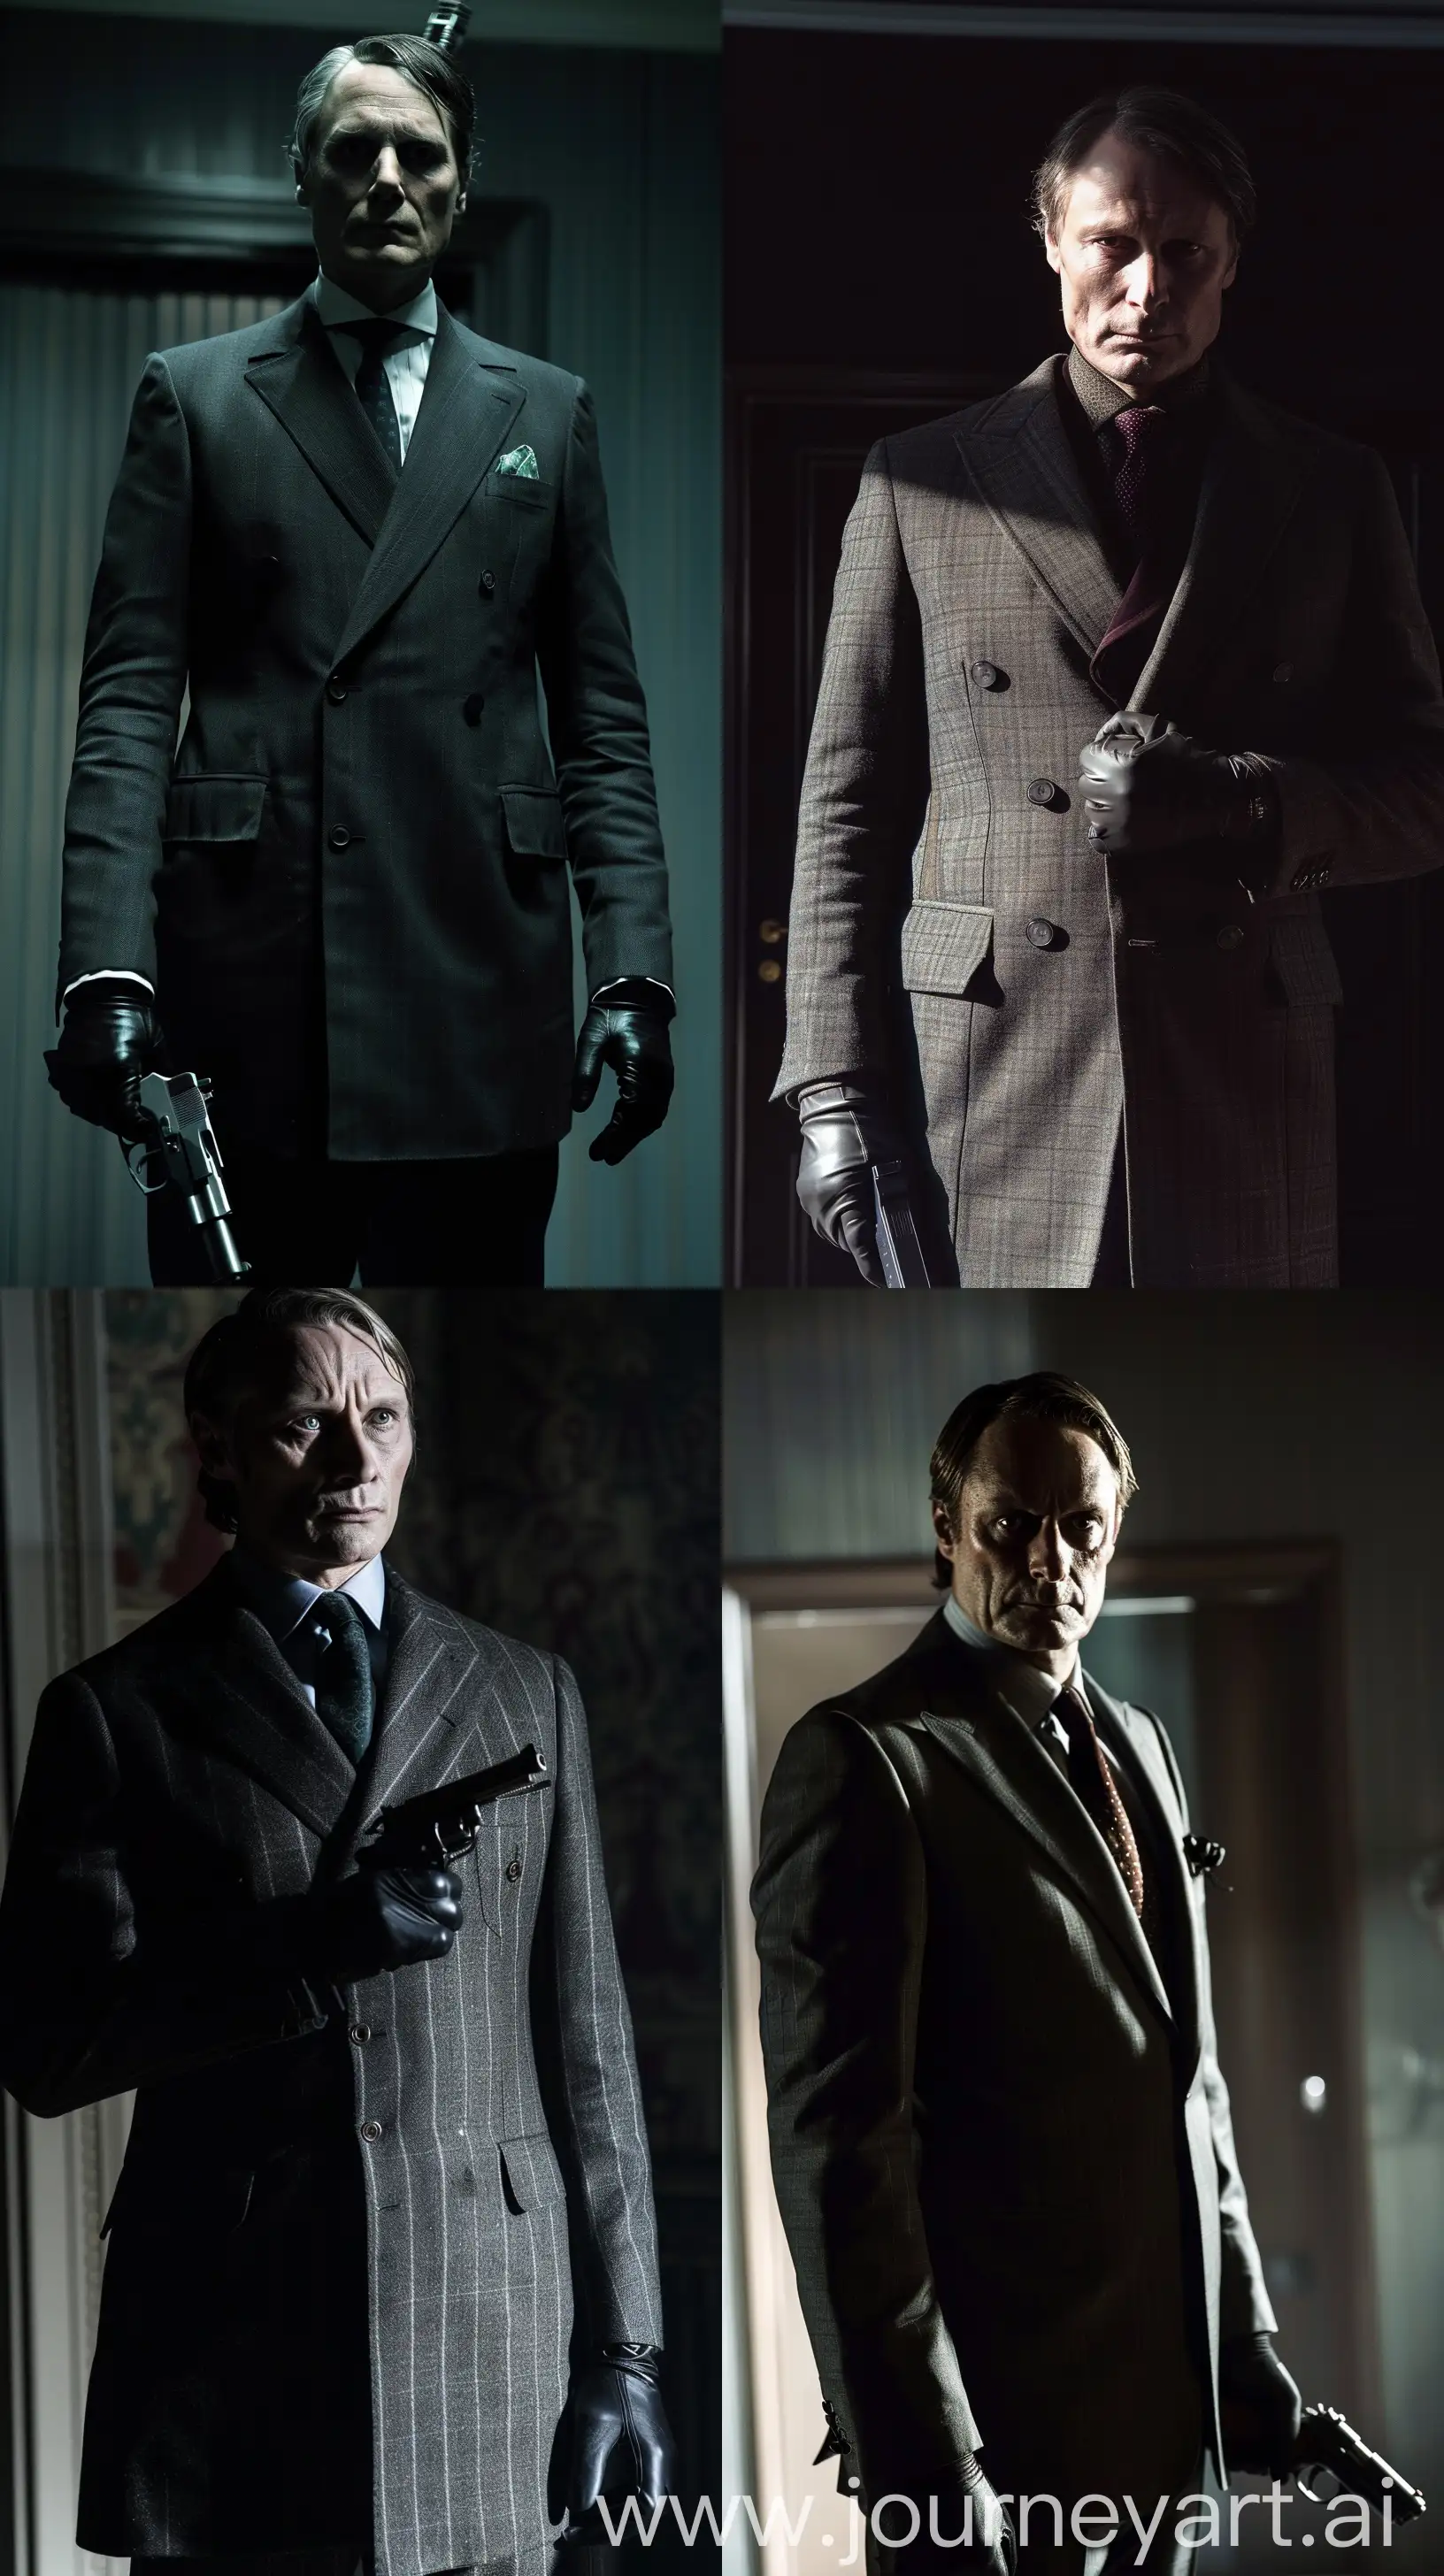 Imagine a chilling scene where Mads Mikkelsen embodies the infamous cannibalistic doctor, Hannibal Lecter, exuding an aura of sophistication and danger. Picture him standing in a dimly lit room, wearing a sharp tailored suit befitting the iconic character, his piercing gaze fixed forward. In his gloved hand, he discreetly holds a sleek, silenced mafia gun, hinting at his association with a darker underworld. The ambiance is tense and foreboding, capturing the complex duality of a cultured yet sinister individual. Let the shadows play off his expression as he navigates the thin line between elegance and malevolence --ar 9:16 --style raw